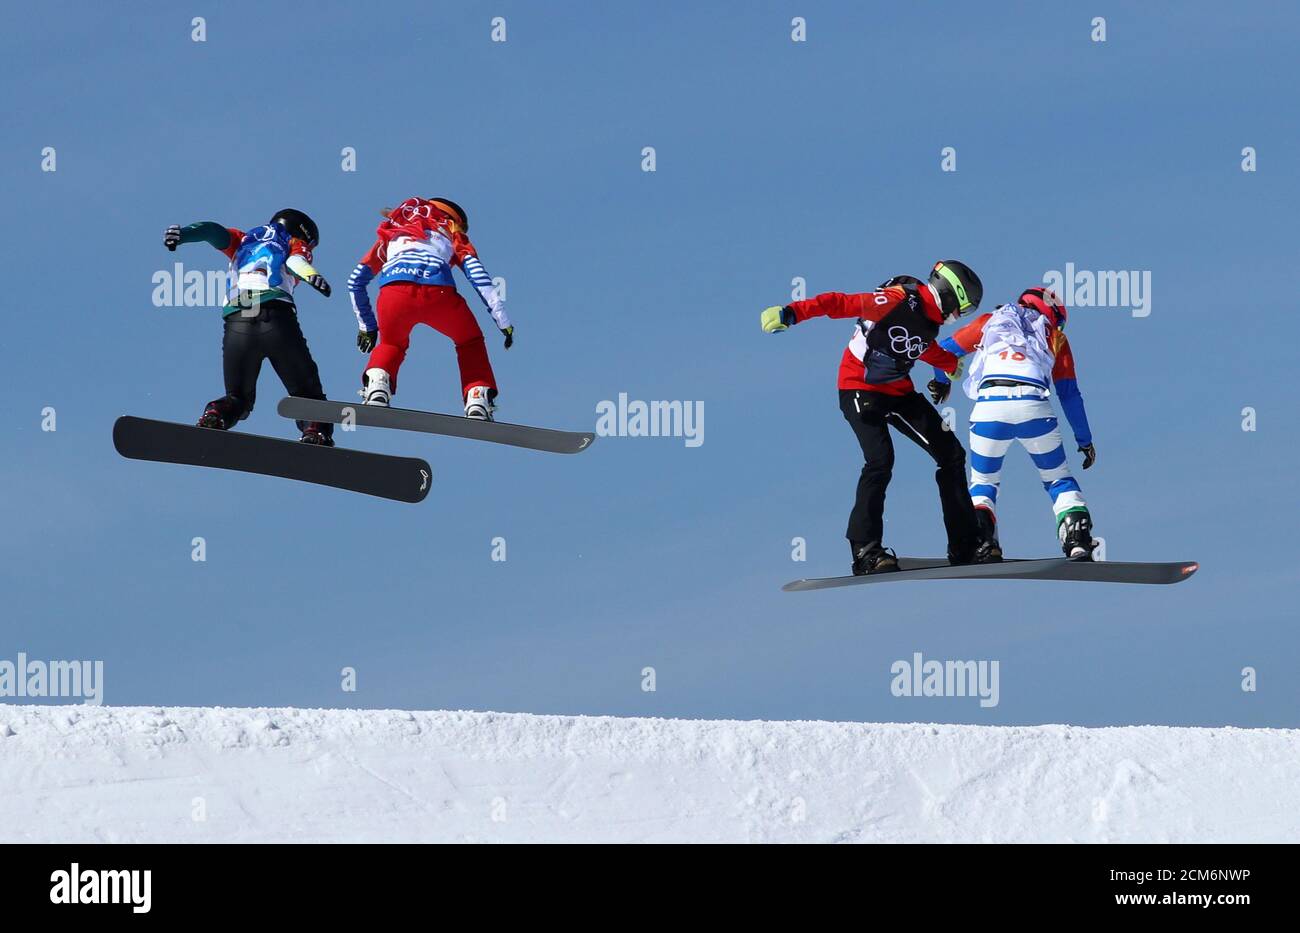 Snowboarding – Pyeongchang 2018 Winter Olympics – Women's Snowboard Cross Finals – Phoenix Snow Park – Pyeongchang, South Korea – February 16, 2018 - Raffaella Brutto of Italy competes with Tess Critchlow of Canada, Charlotte Bankes of France and Belle Brockhoff of Australia. REUTERS/Mike Blake Stock Photo